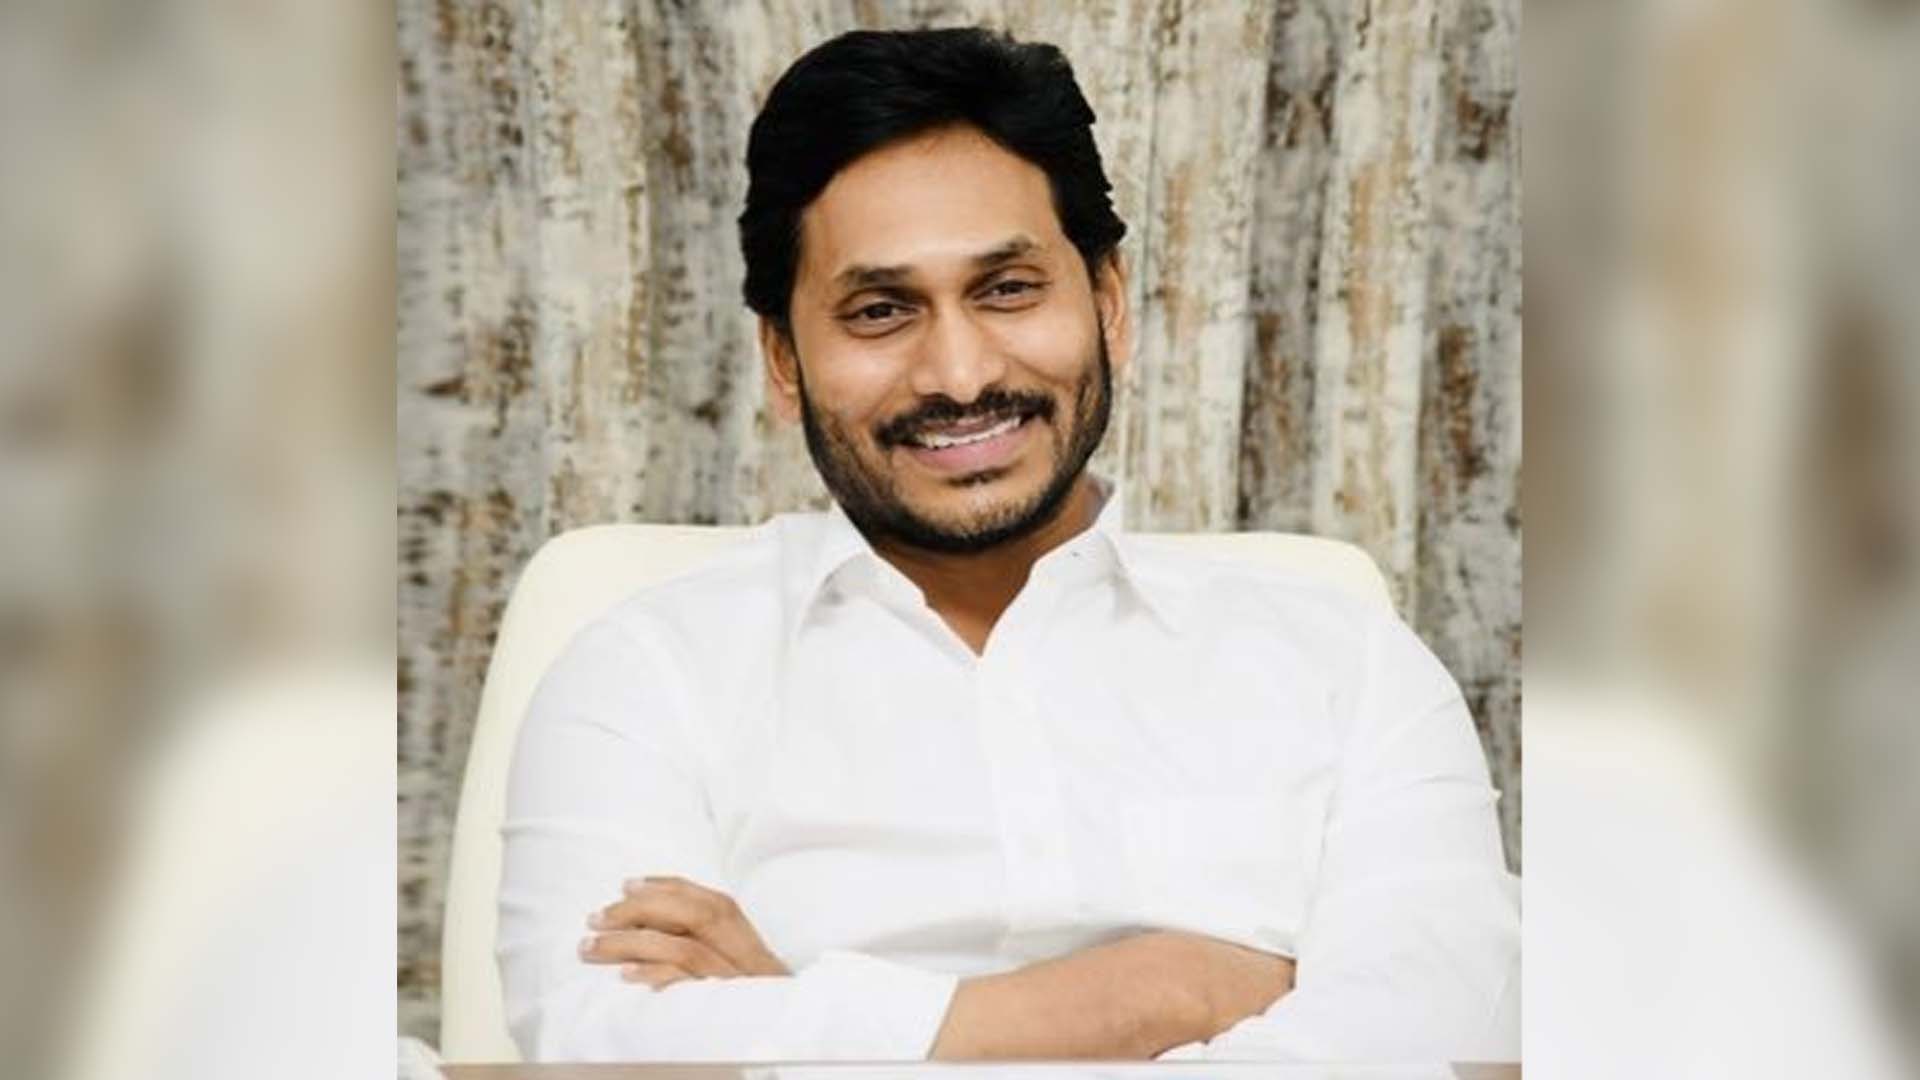 Jagan Mohan Reddy to kick off election campaign with bus tour in Andhra Pradesh from Mar 27